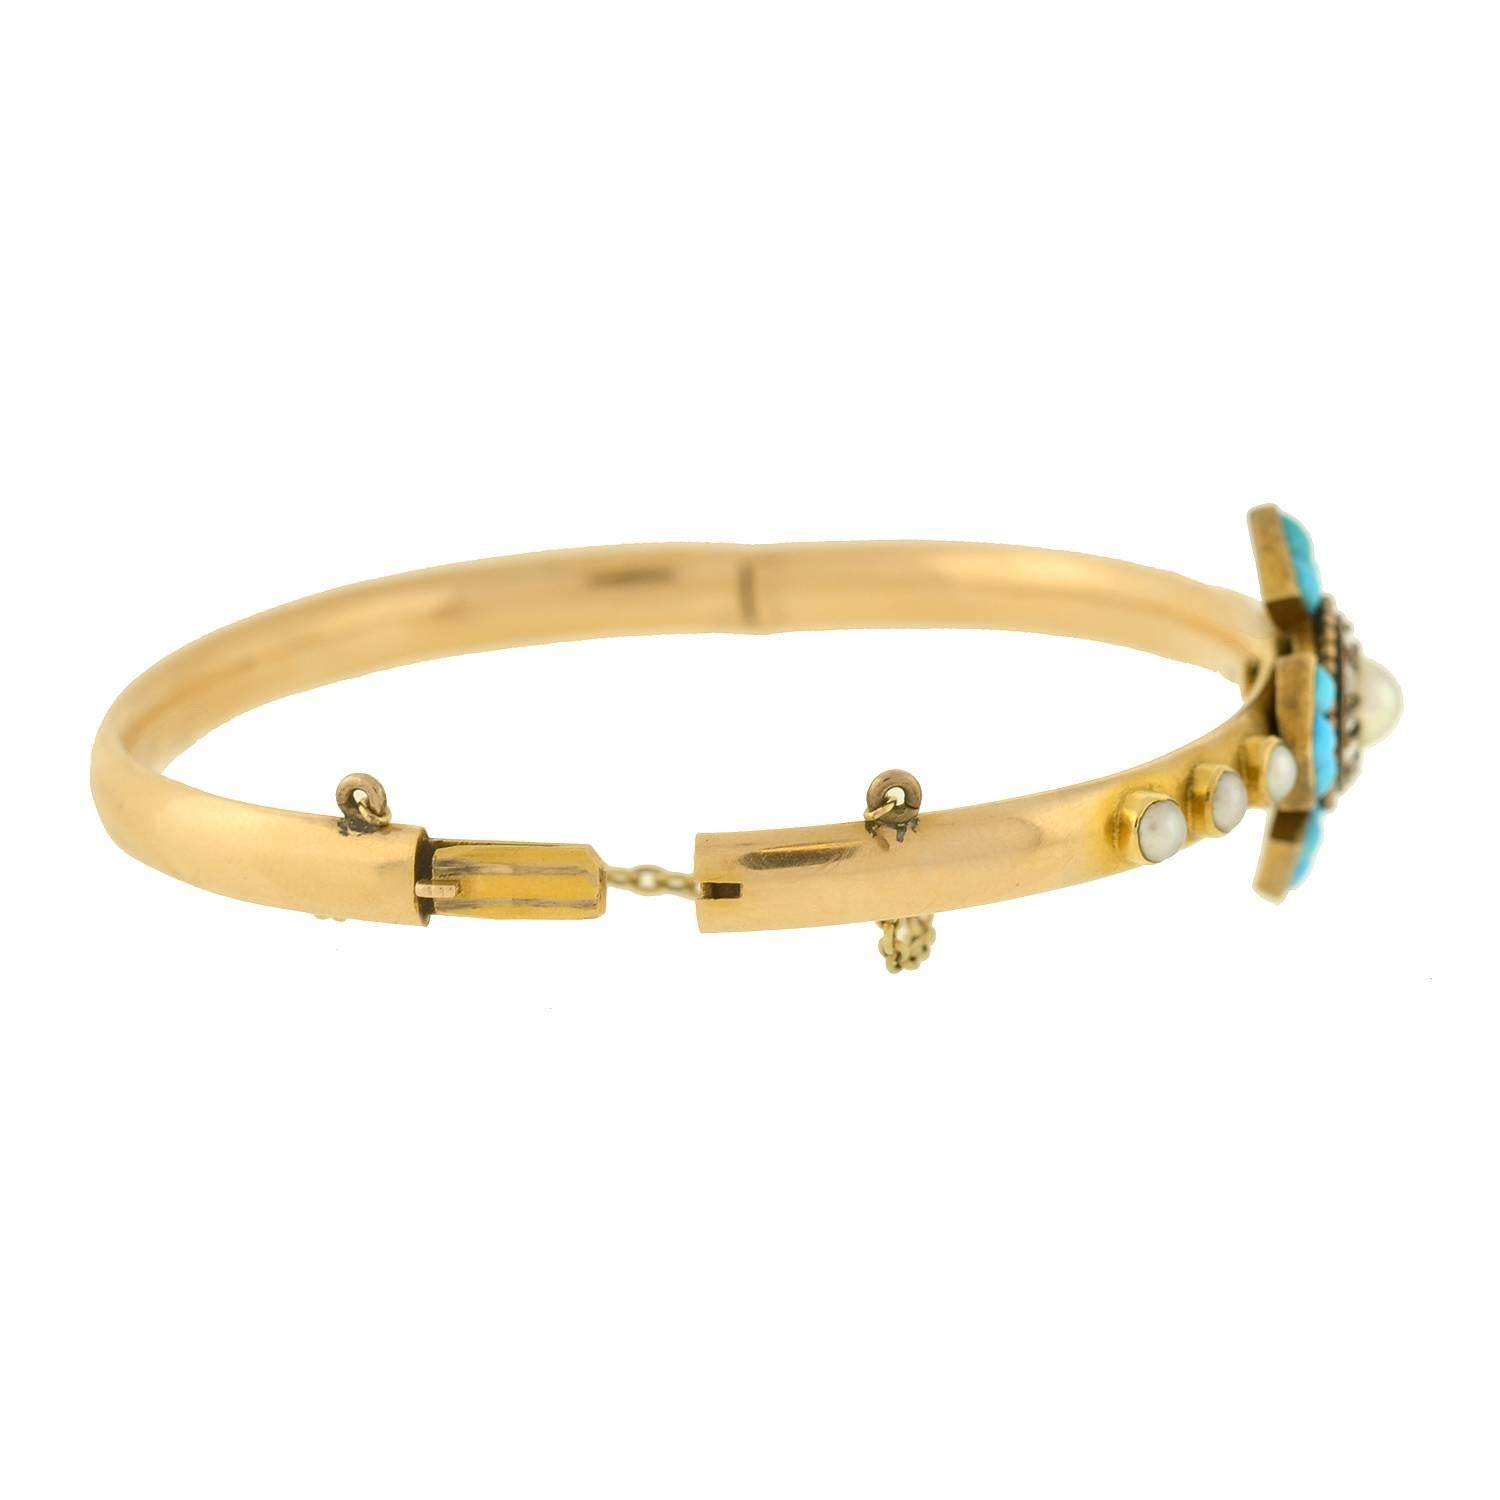 A spectacular turquoise, pearl and diamond bracelet from the Victorian era (ca1880s)! Made of vibrant 14kt yellow gold, the bracelet is a hinged bangle style with a stunning gemstone-encrusted centerpiece face. Resting at the center is a magnificent